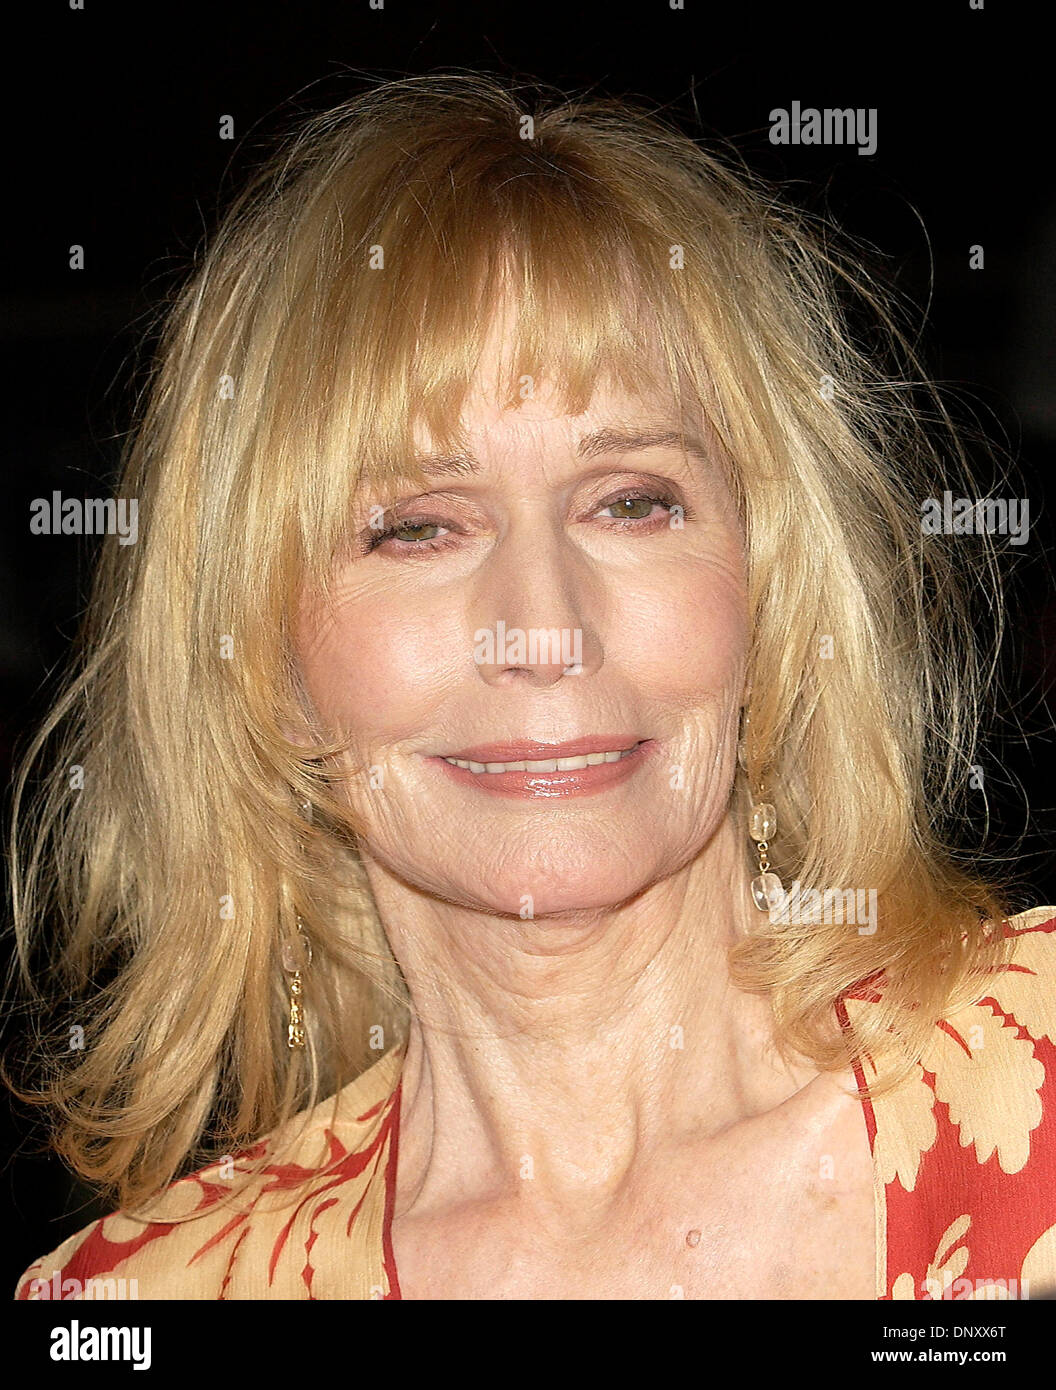 January 7, 2006; Palm Springs, CA, USA; Actress SALLY KELLERMAN at the 17th Annual Palm Springs International Film Festival Gala Awards presentation at the Palm Springs Convention Center.. Mandatory Credit: Photo by Vaughn Youtz/ZUMA Press. (©) Copyright 2005 by Vaughn Youtz. Stock Photo